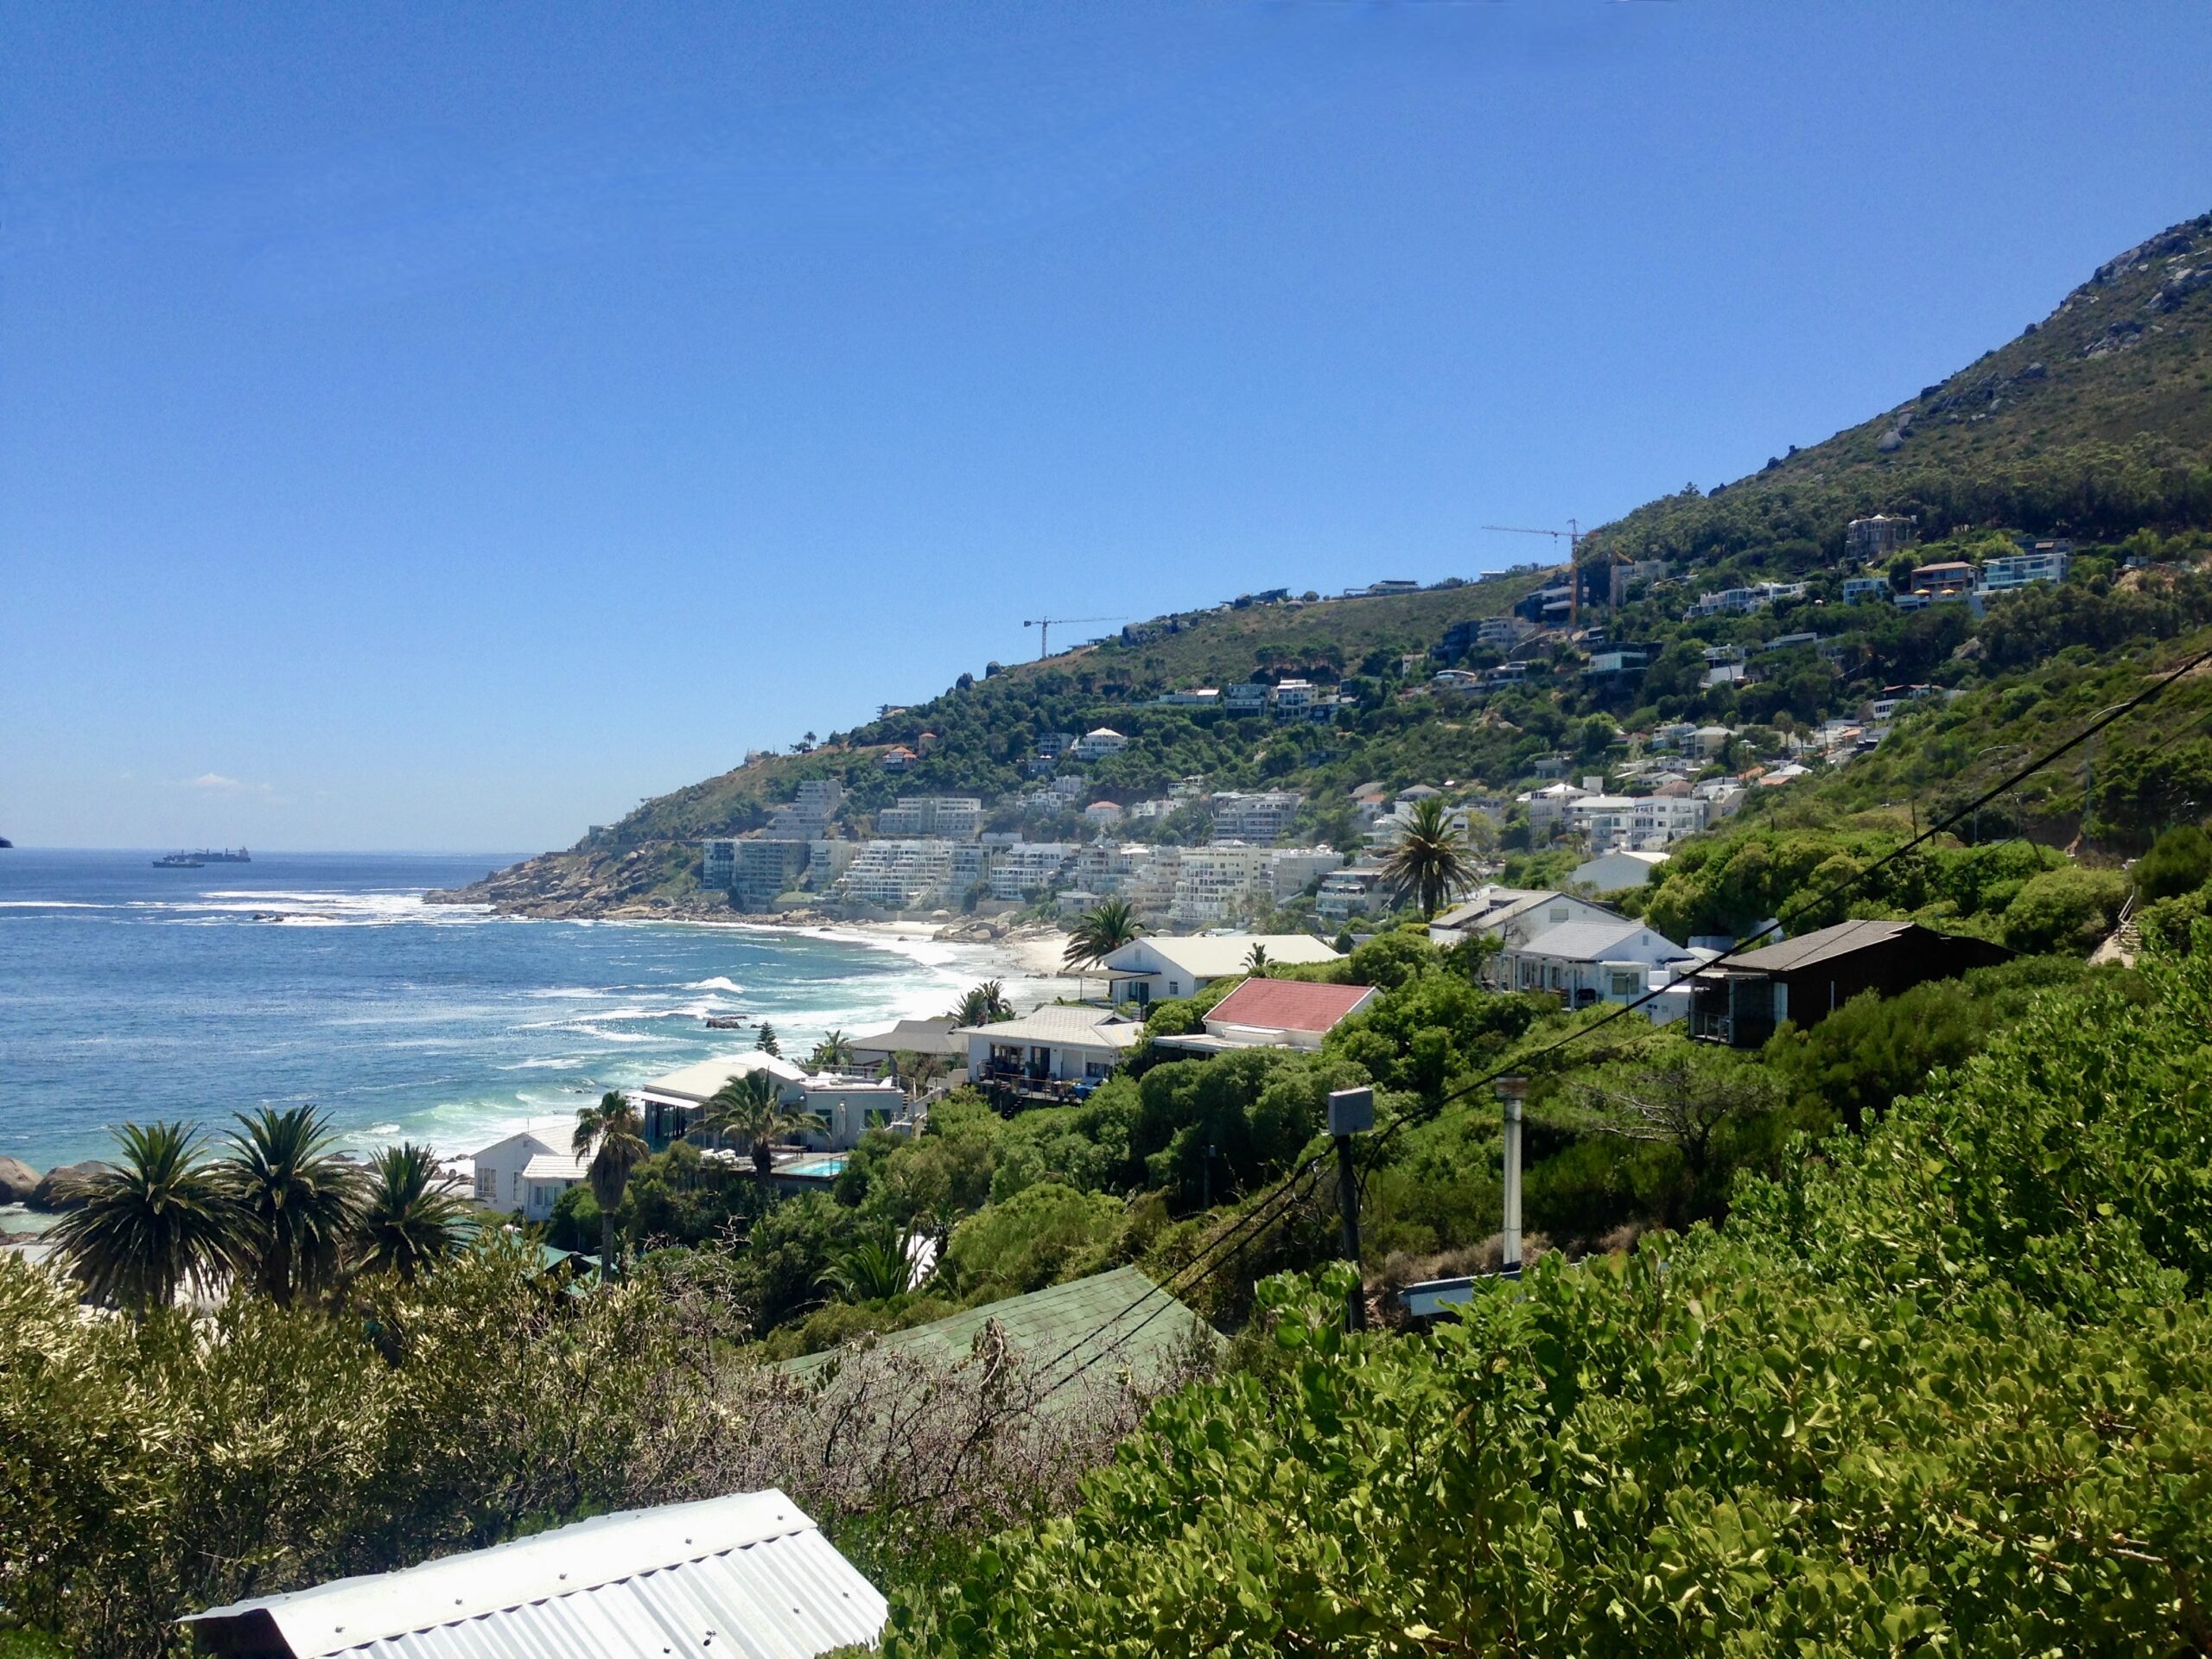 Scenic coastal view of a town nestled between lush green hills and the ocean. The hillside is dotted with houses and vegetation, with a beach stretching along the shore. Clear blue sky and calm sea visible in the background.